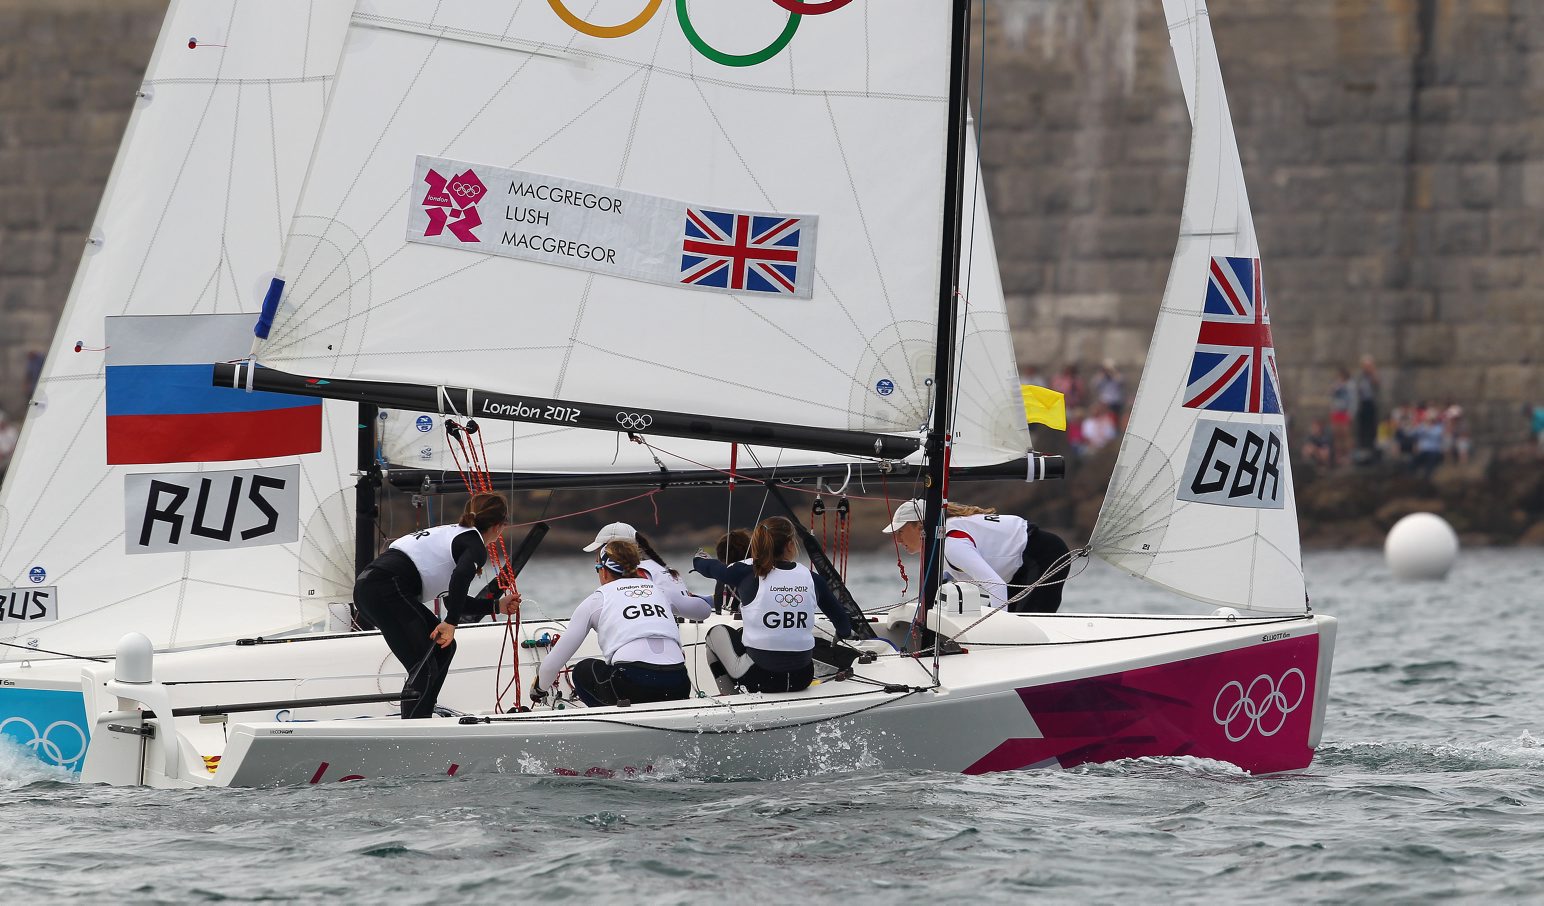 Lucy Macgregor, Annie Lush and Kate Macgregor in action at the 2012 Olympics